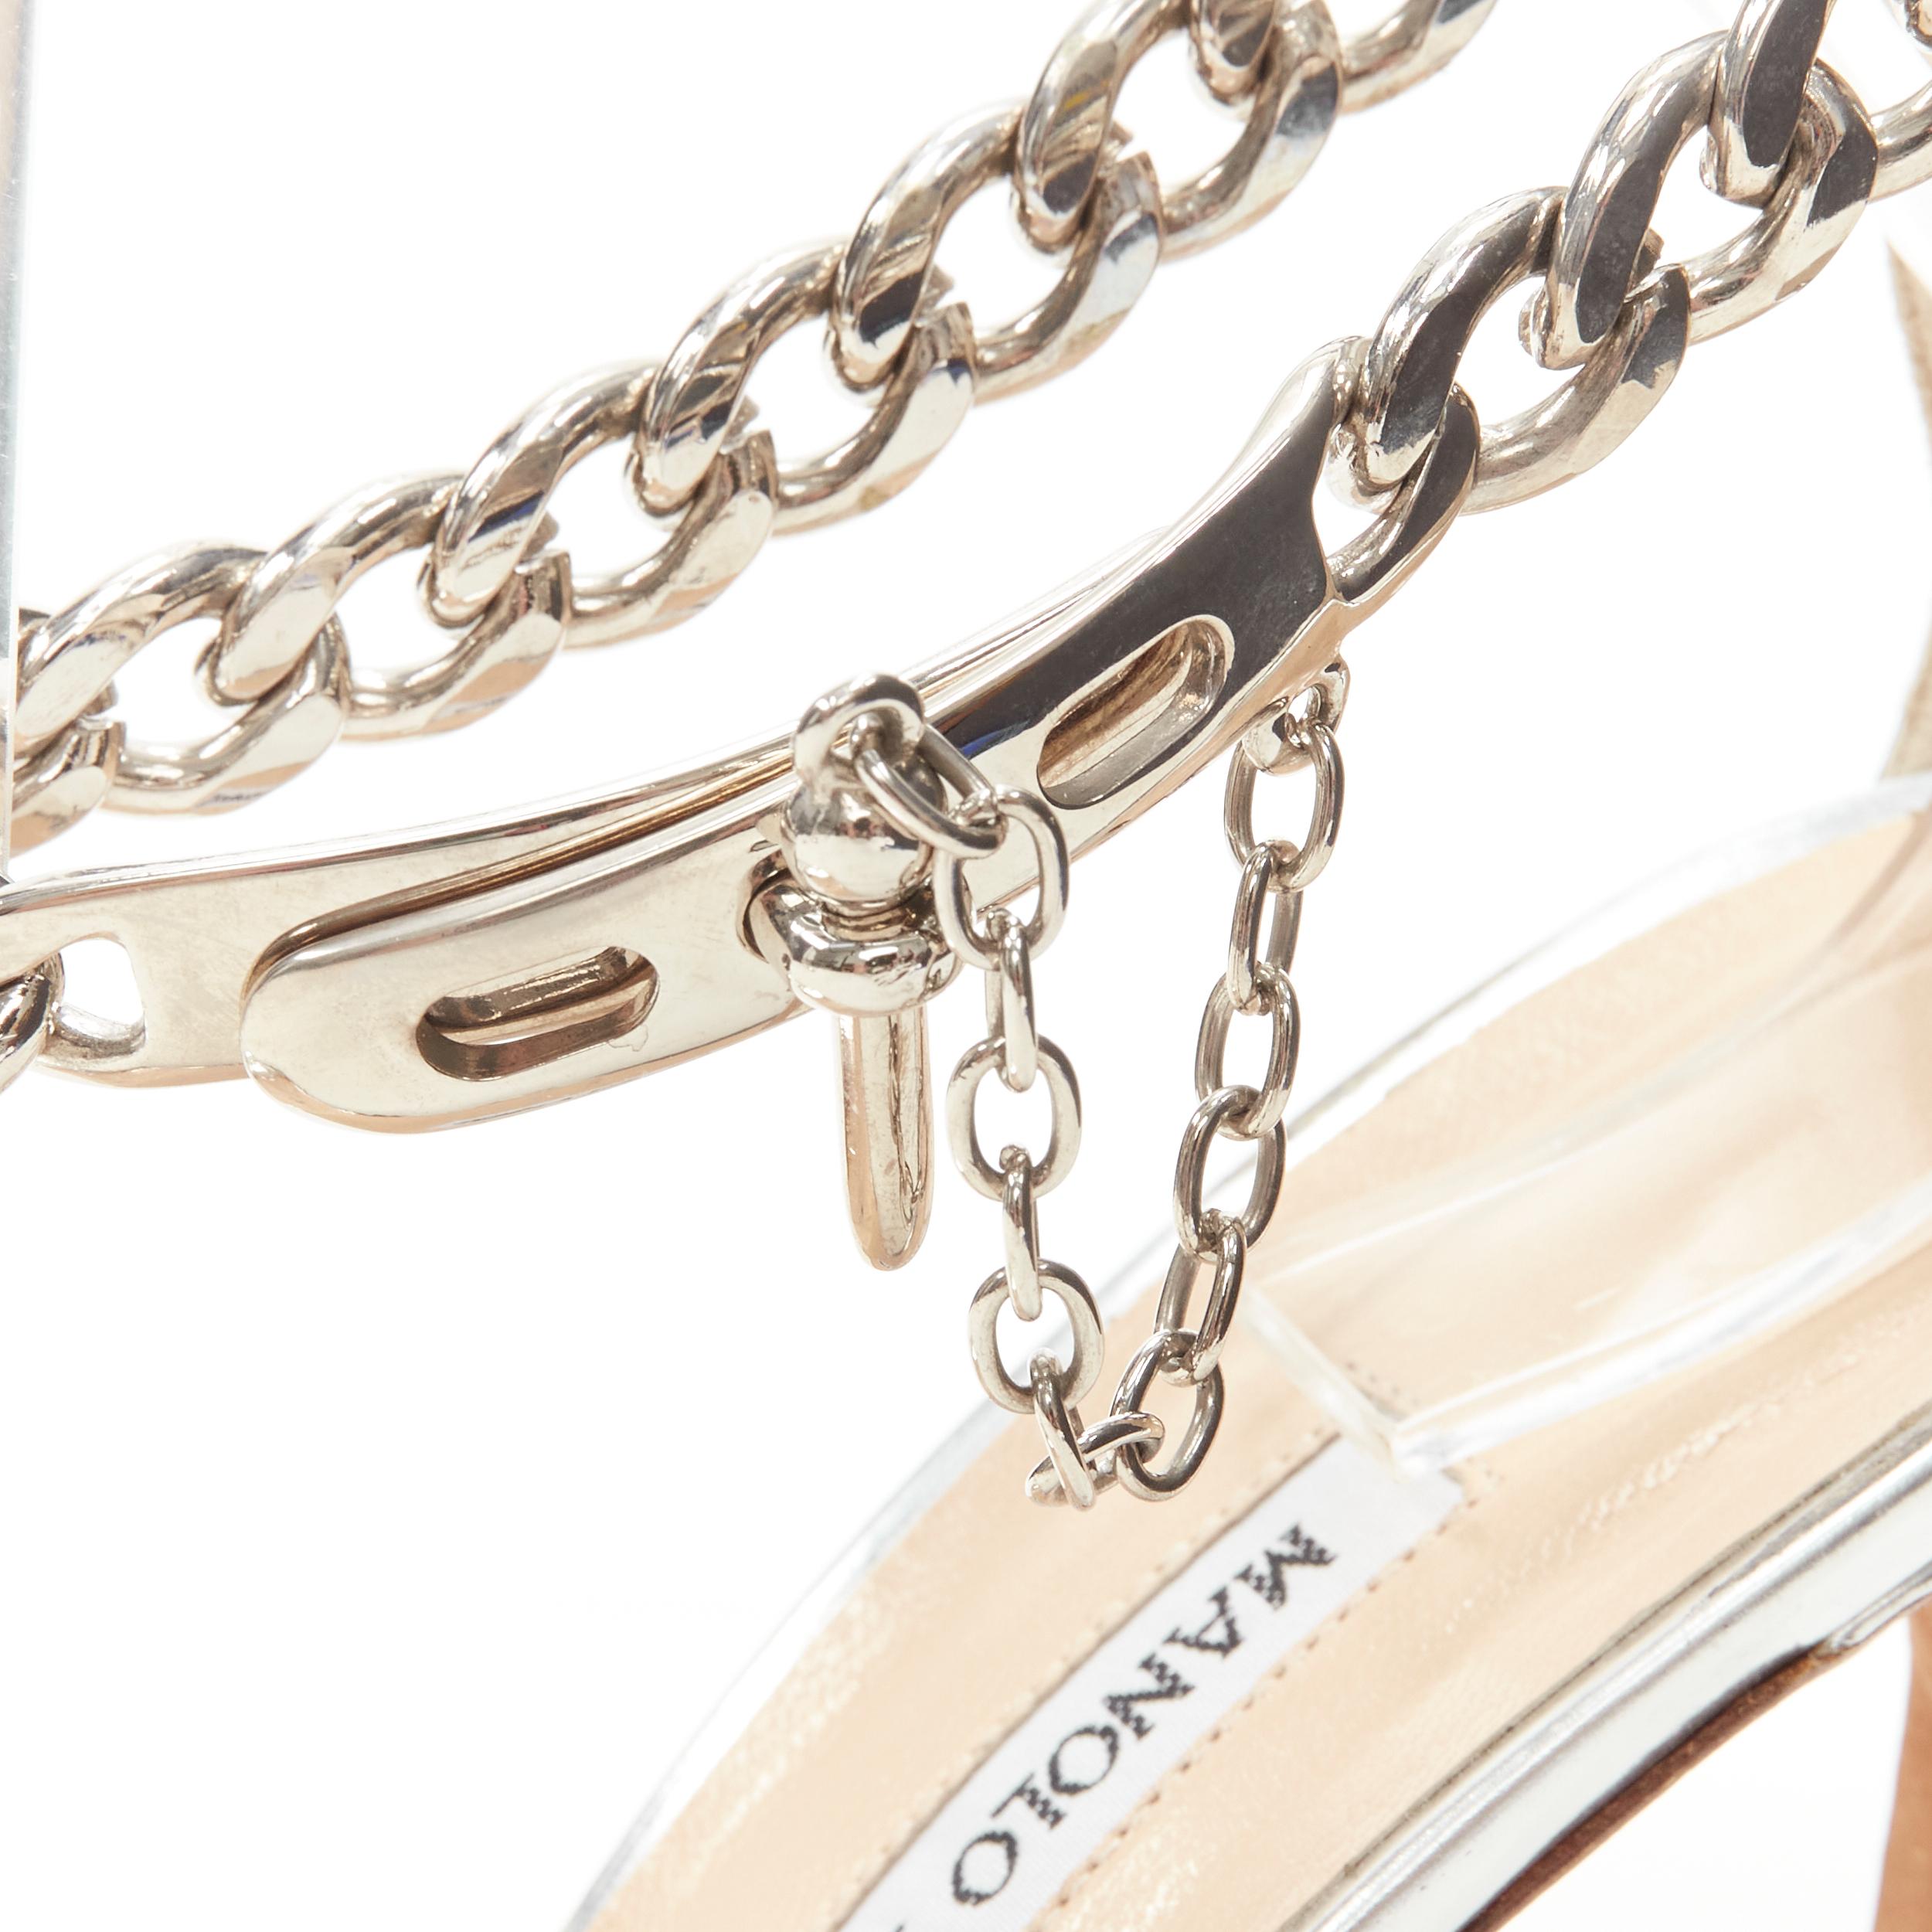 MANOLO BLAHNIK silver chunky chain lock ankle strap high heel sandal EU37 US7 
Reference: LNKO/A01991 
Brand: Manolo Blahnik 
Material: Leather 
Color: Silver 
Pattern: Solid 
Extra Detail: Metal chain ankle strap with T-lock detailing. 
Made in: